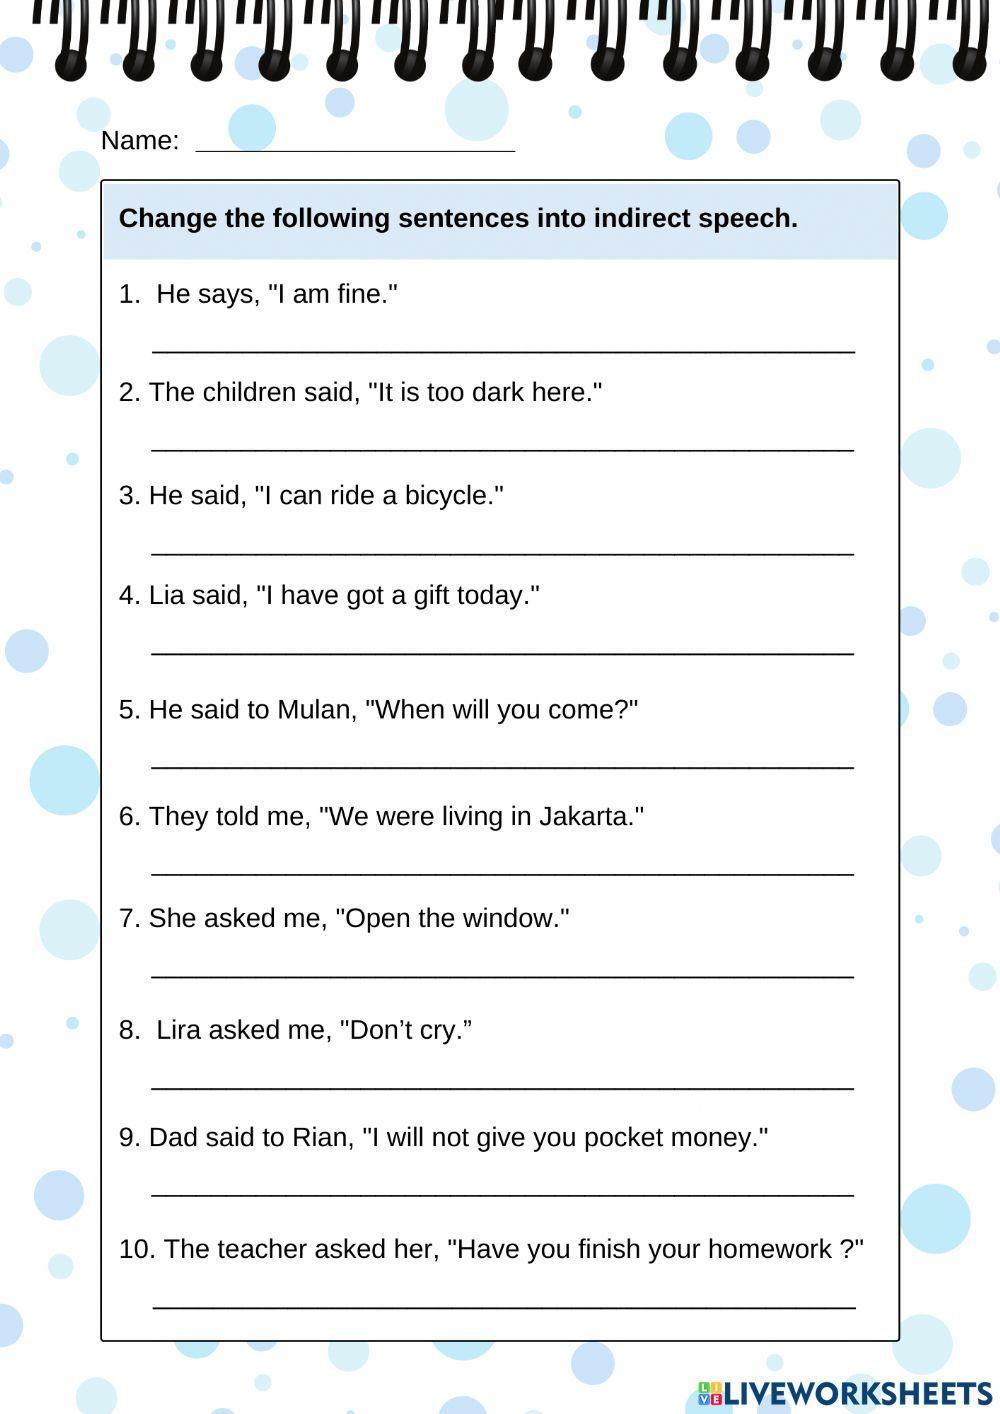 Direct and indirect speech task